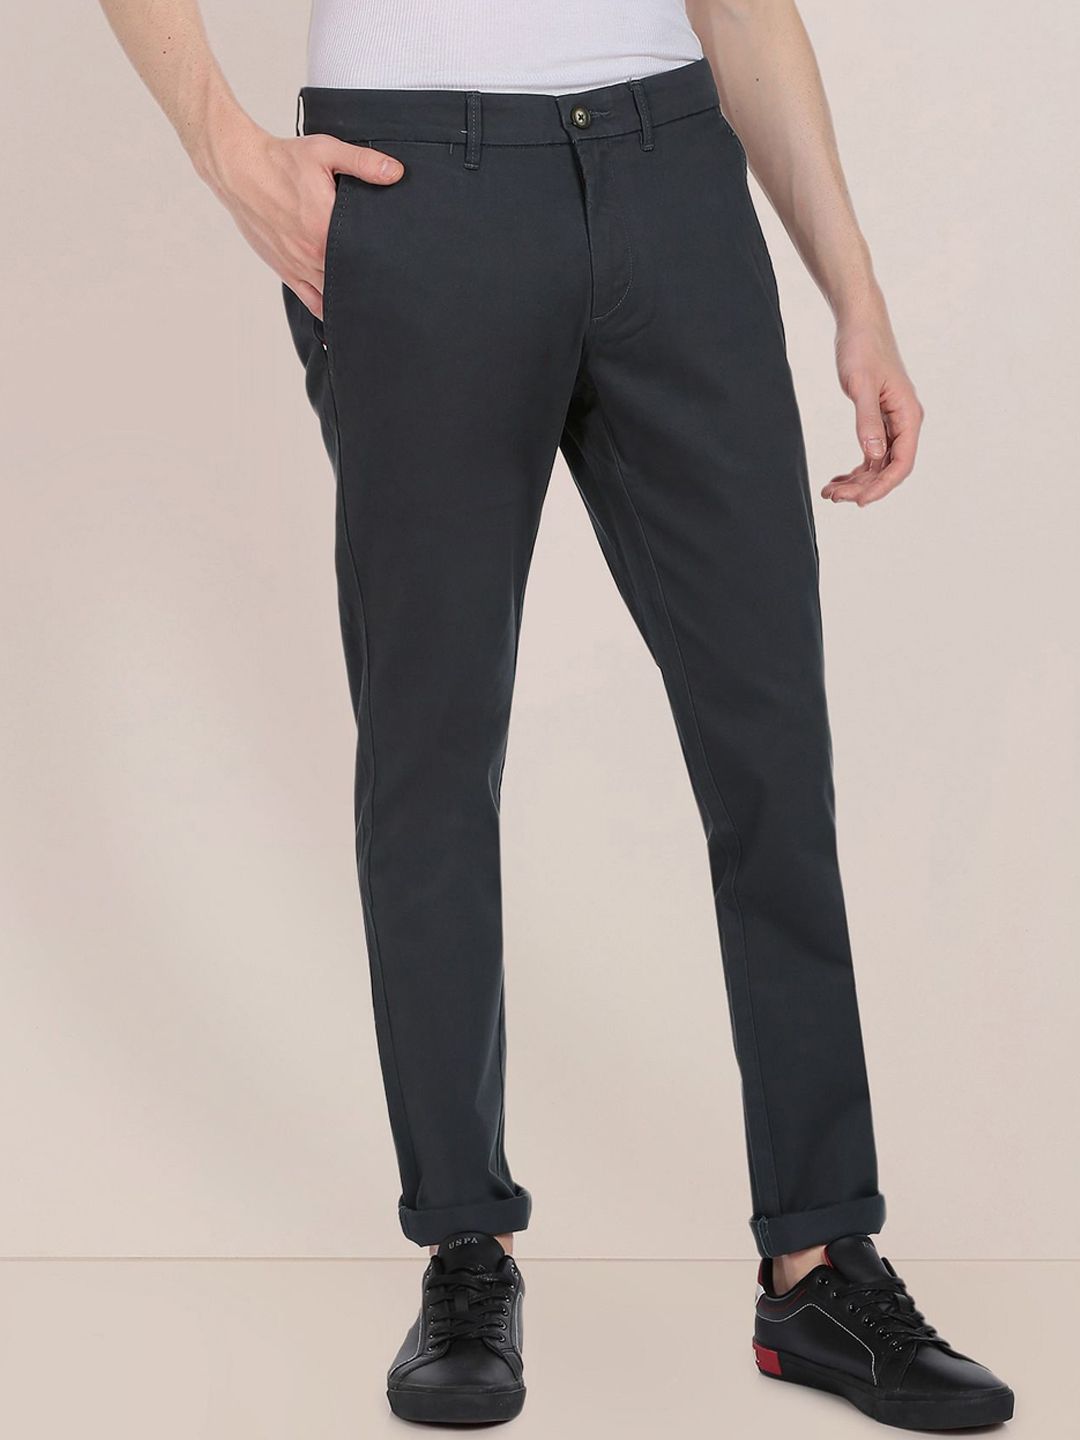 U S Polo Assn 30 Autumn Navy Mens Trousers  Get Best Price from  Manufacturers  Suppliers in India